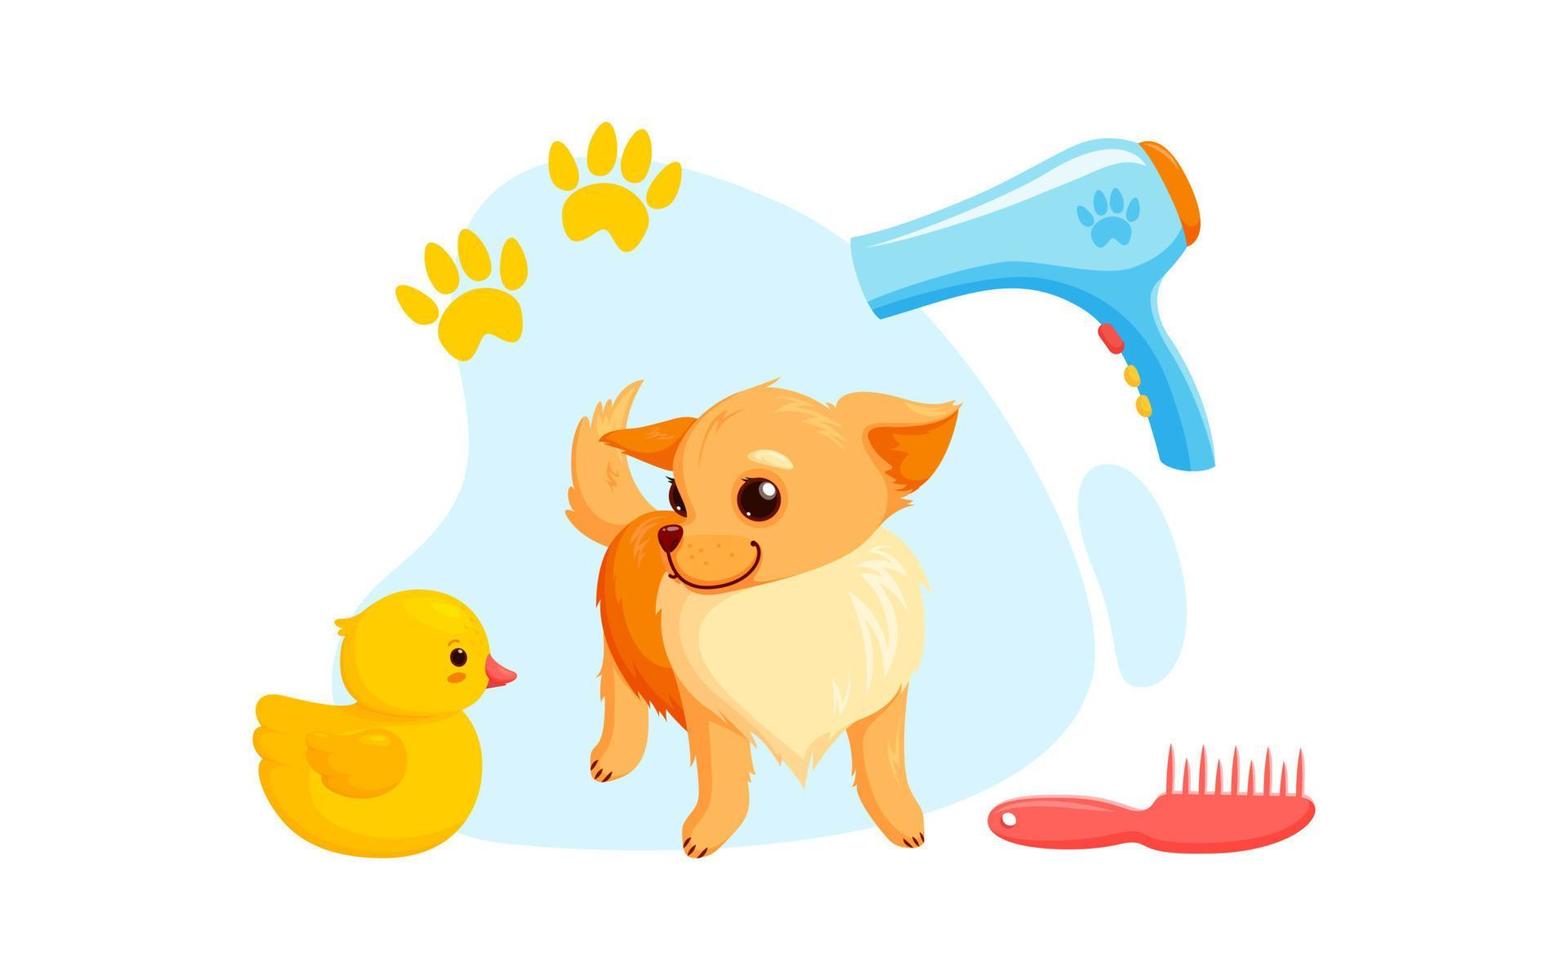 Dog grooming with dryer, combs and rubber ducks. Playful chihuahua puppy in grooming service. Vector illustration